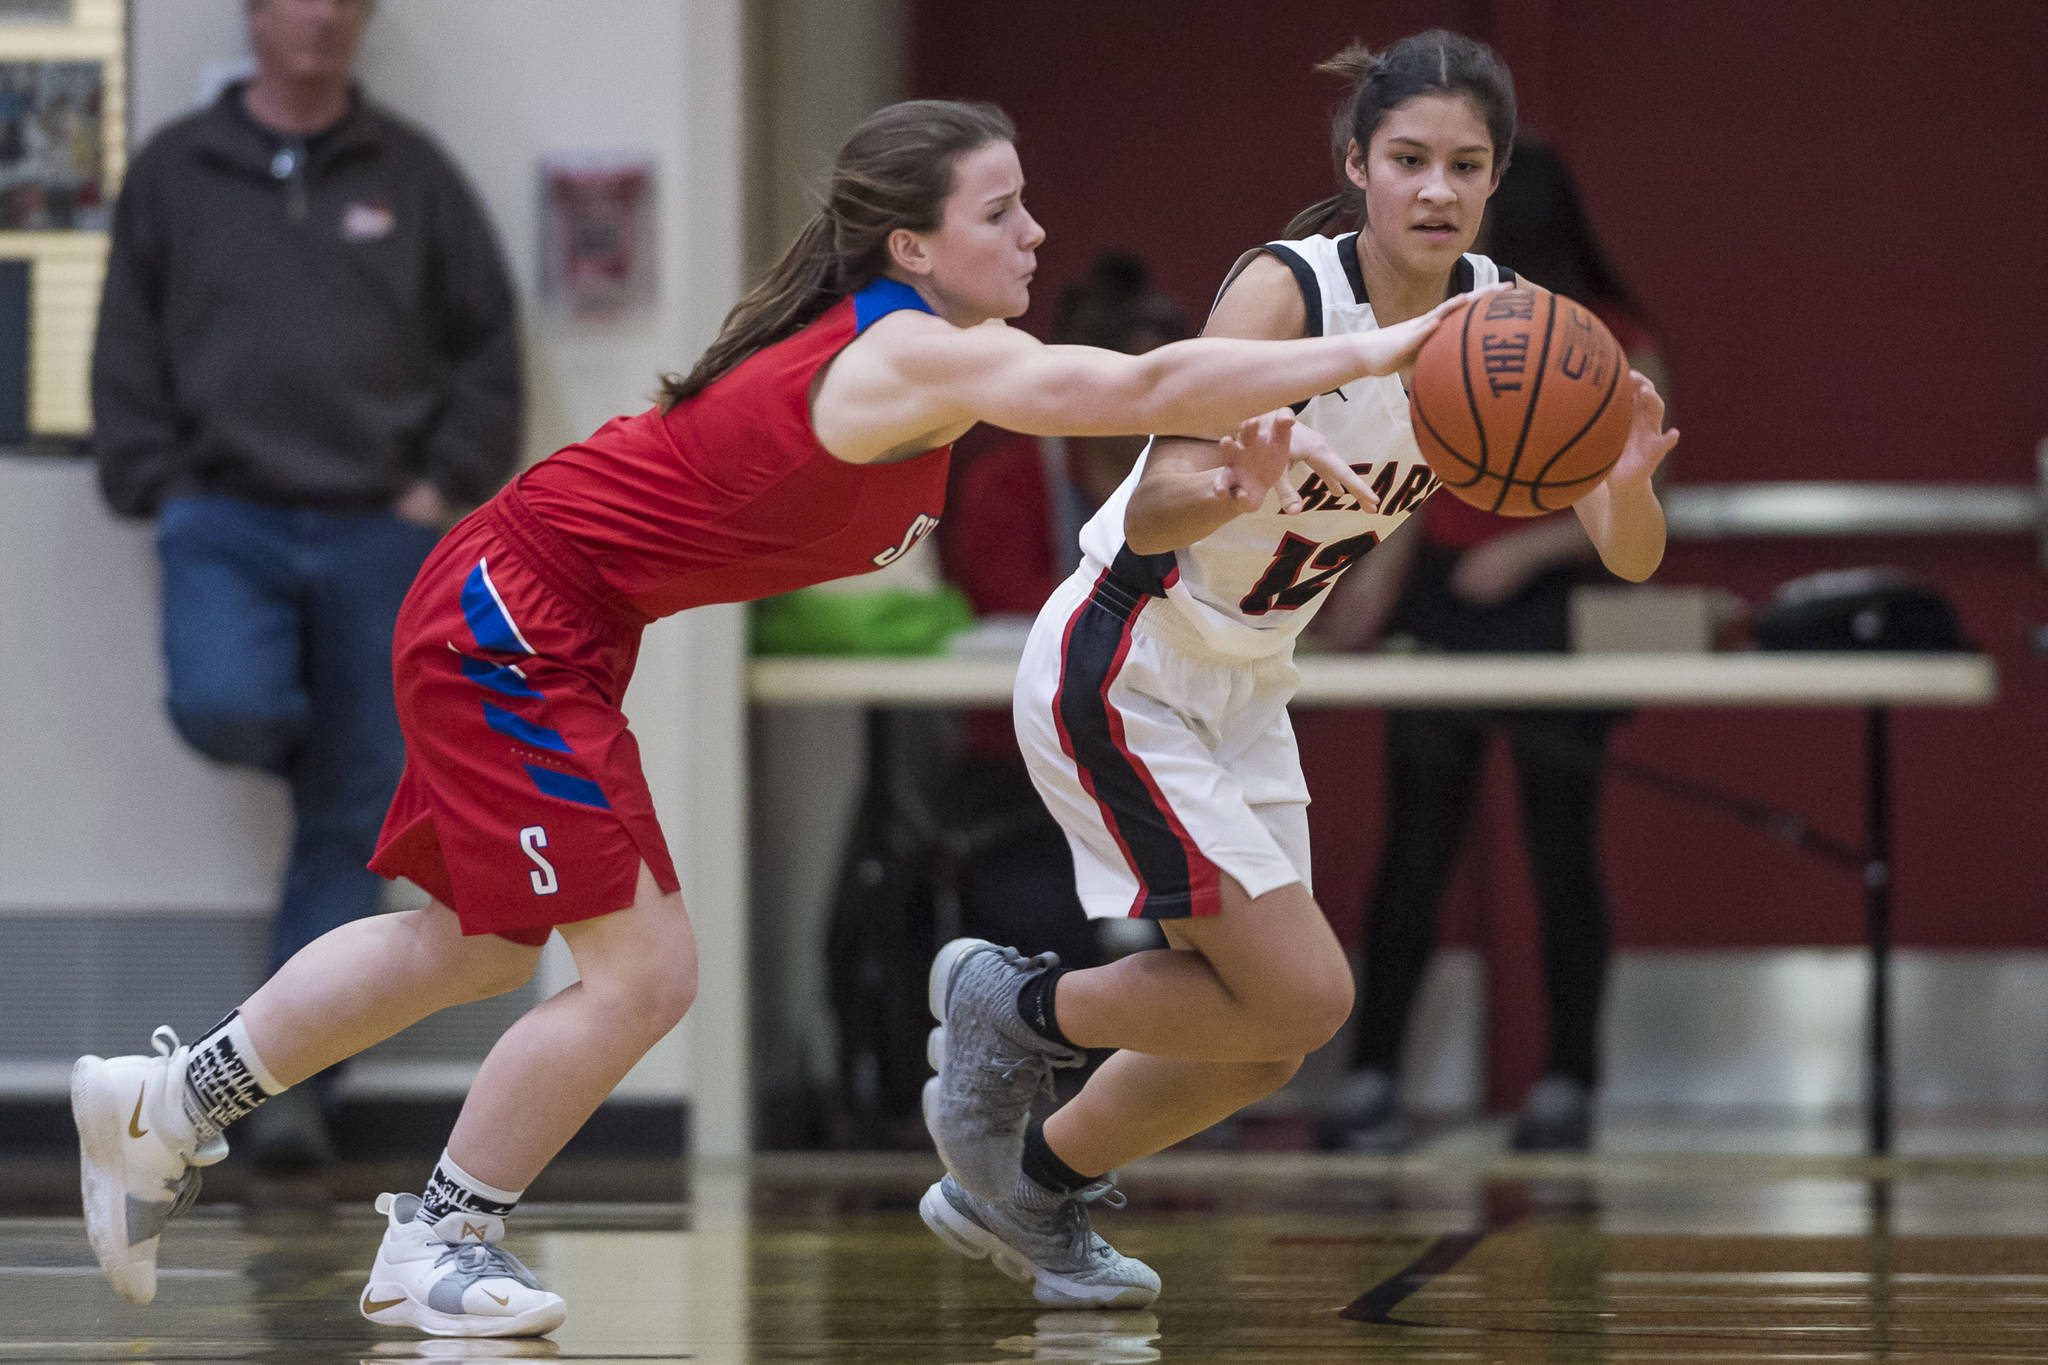 Juneau-Douglas’ Trinity Jackson, right, attempts a steal against Sitka’s Tawny Smith at JDHS on Friday, Jan. 25, 2019. Sitka won 37-31. (Michael Penn | Juneau Empire)